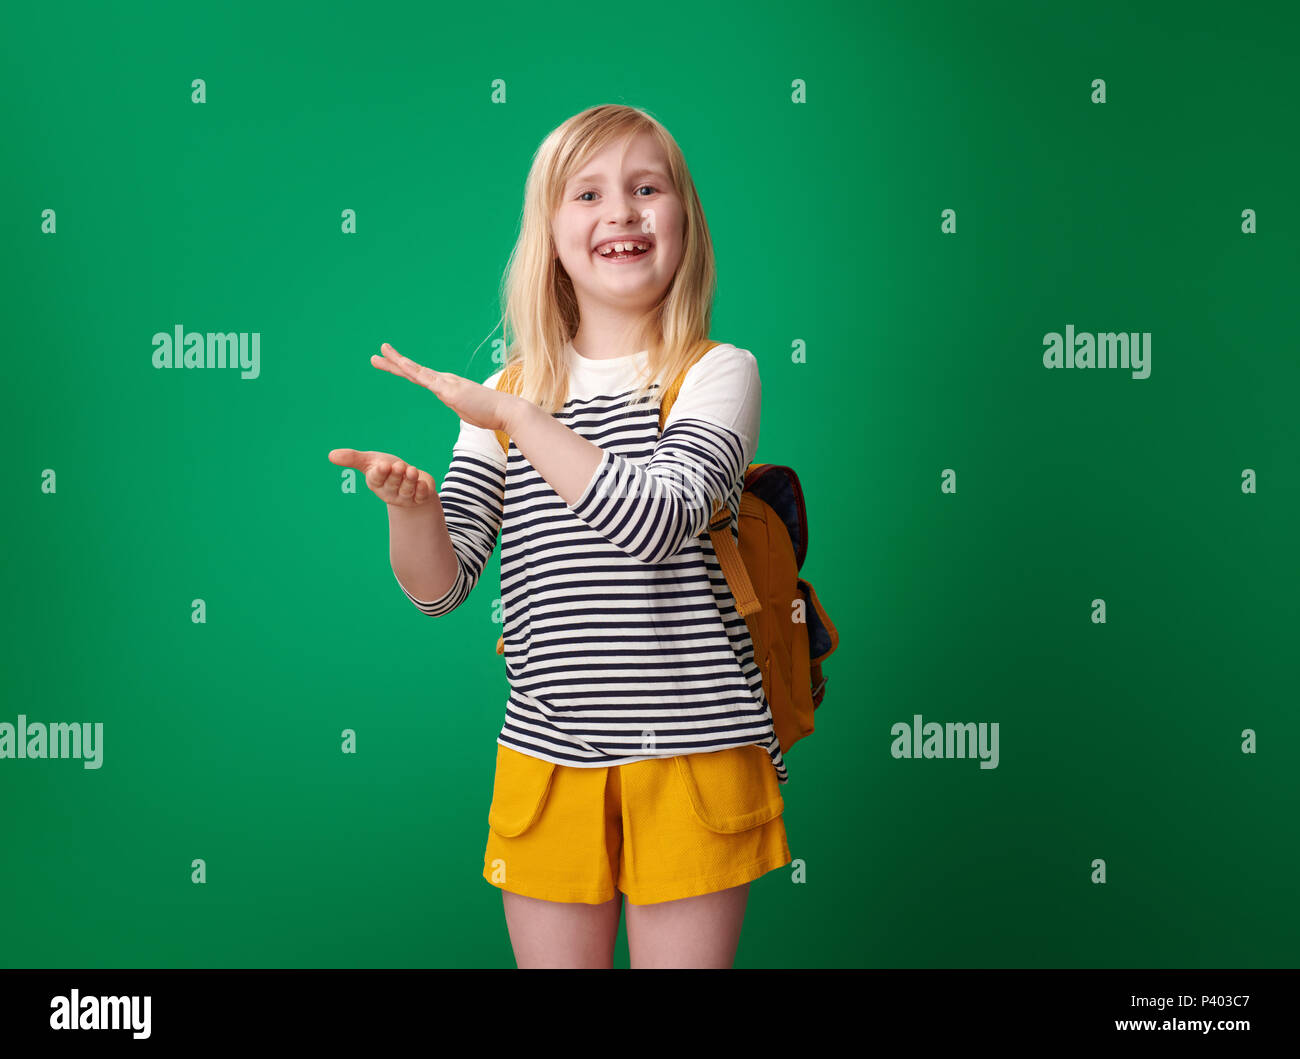 smiling school girl with backpack clapping isolated on green background Stock Photo